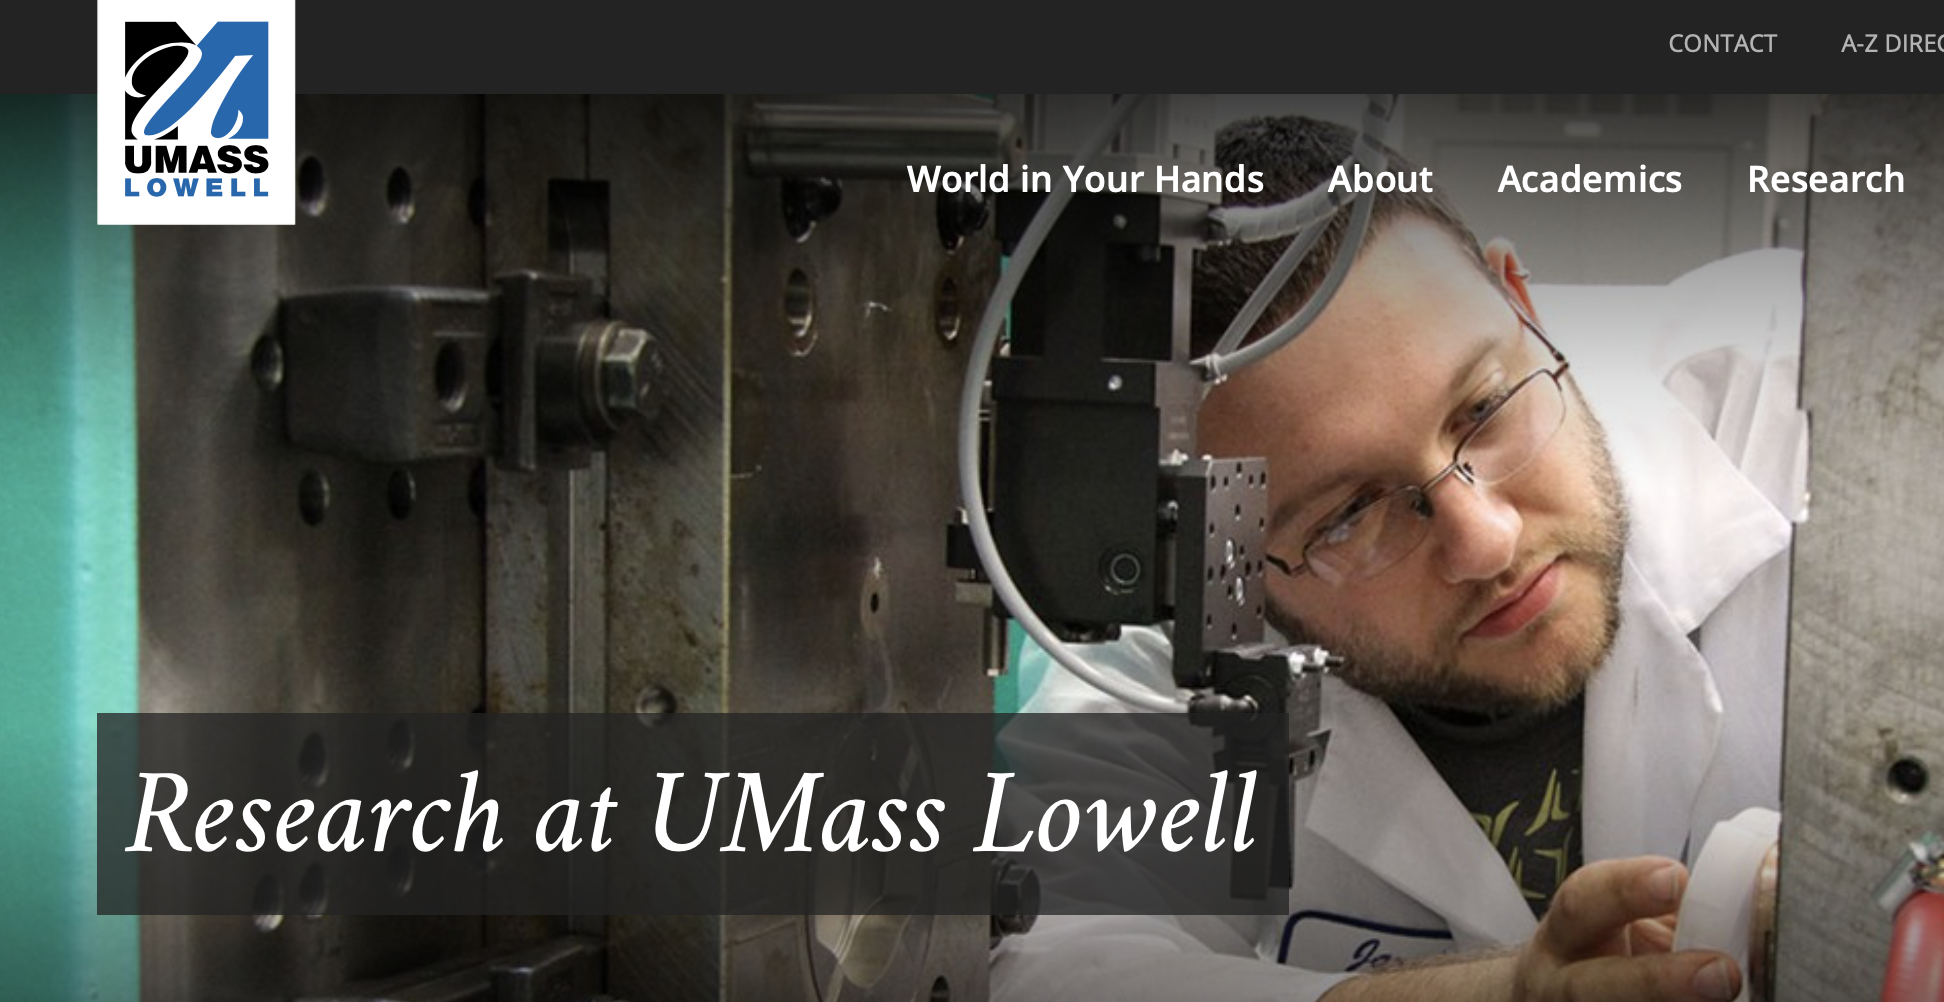 umass lowell research institute